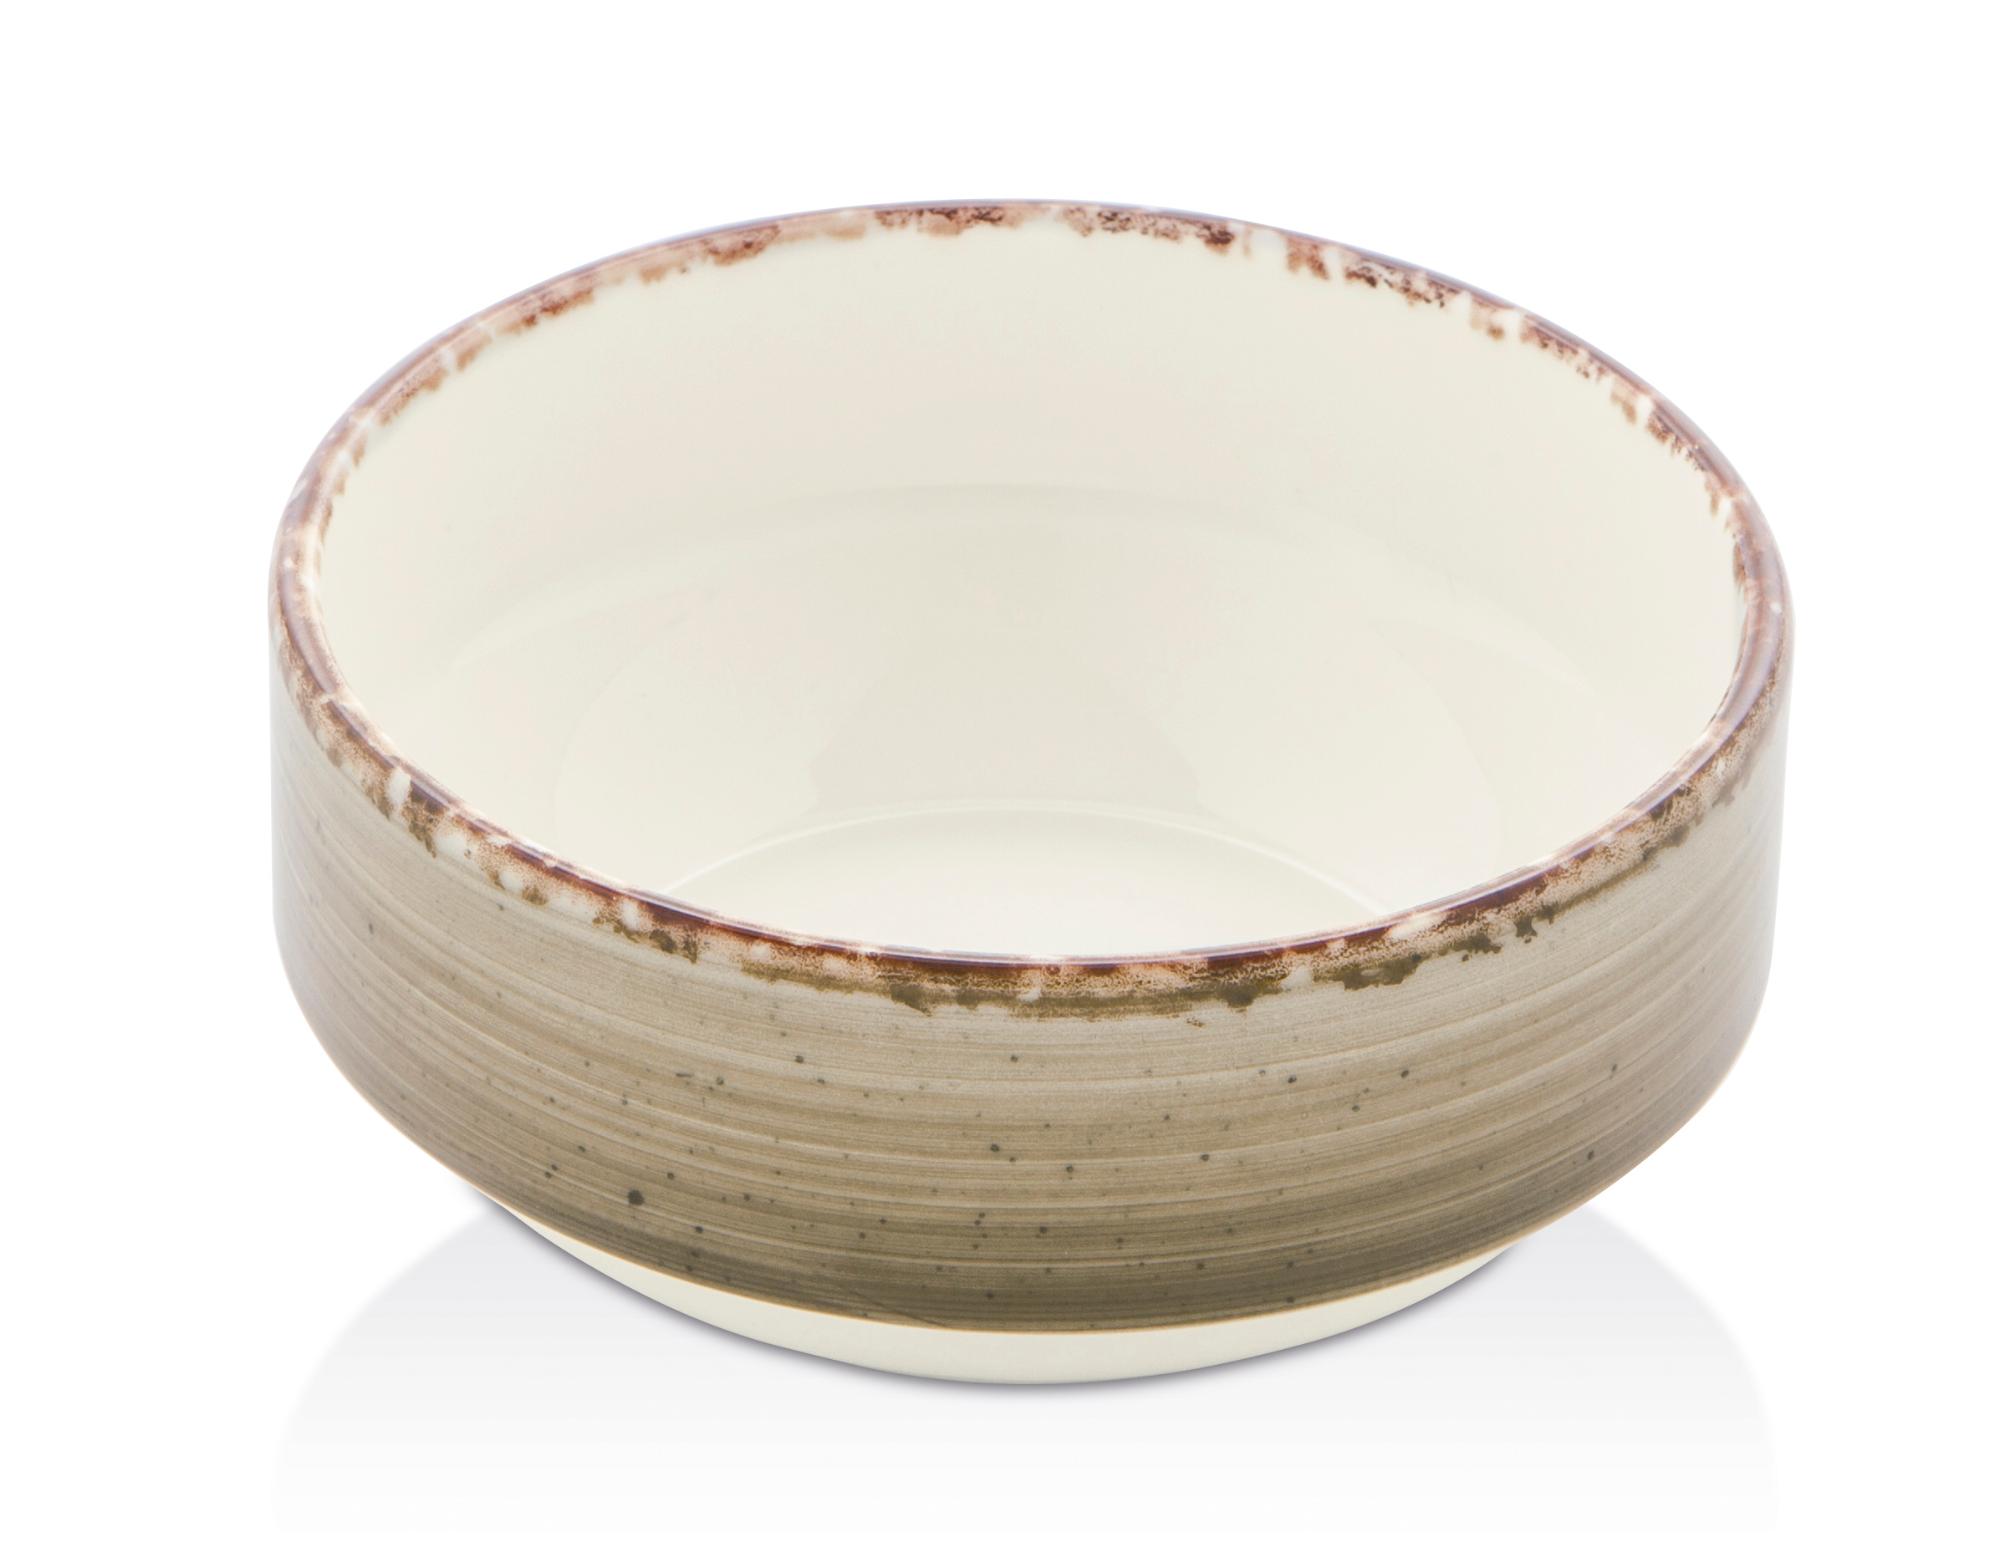 Agat stackable bowl, 60mm